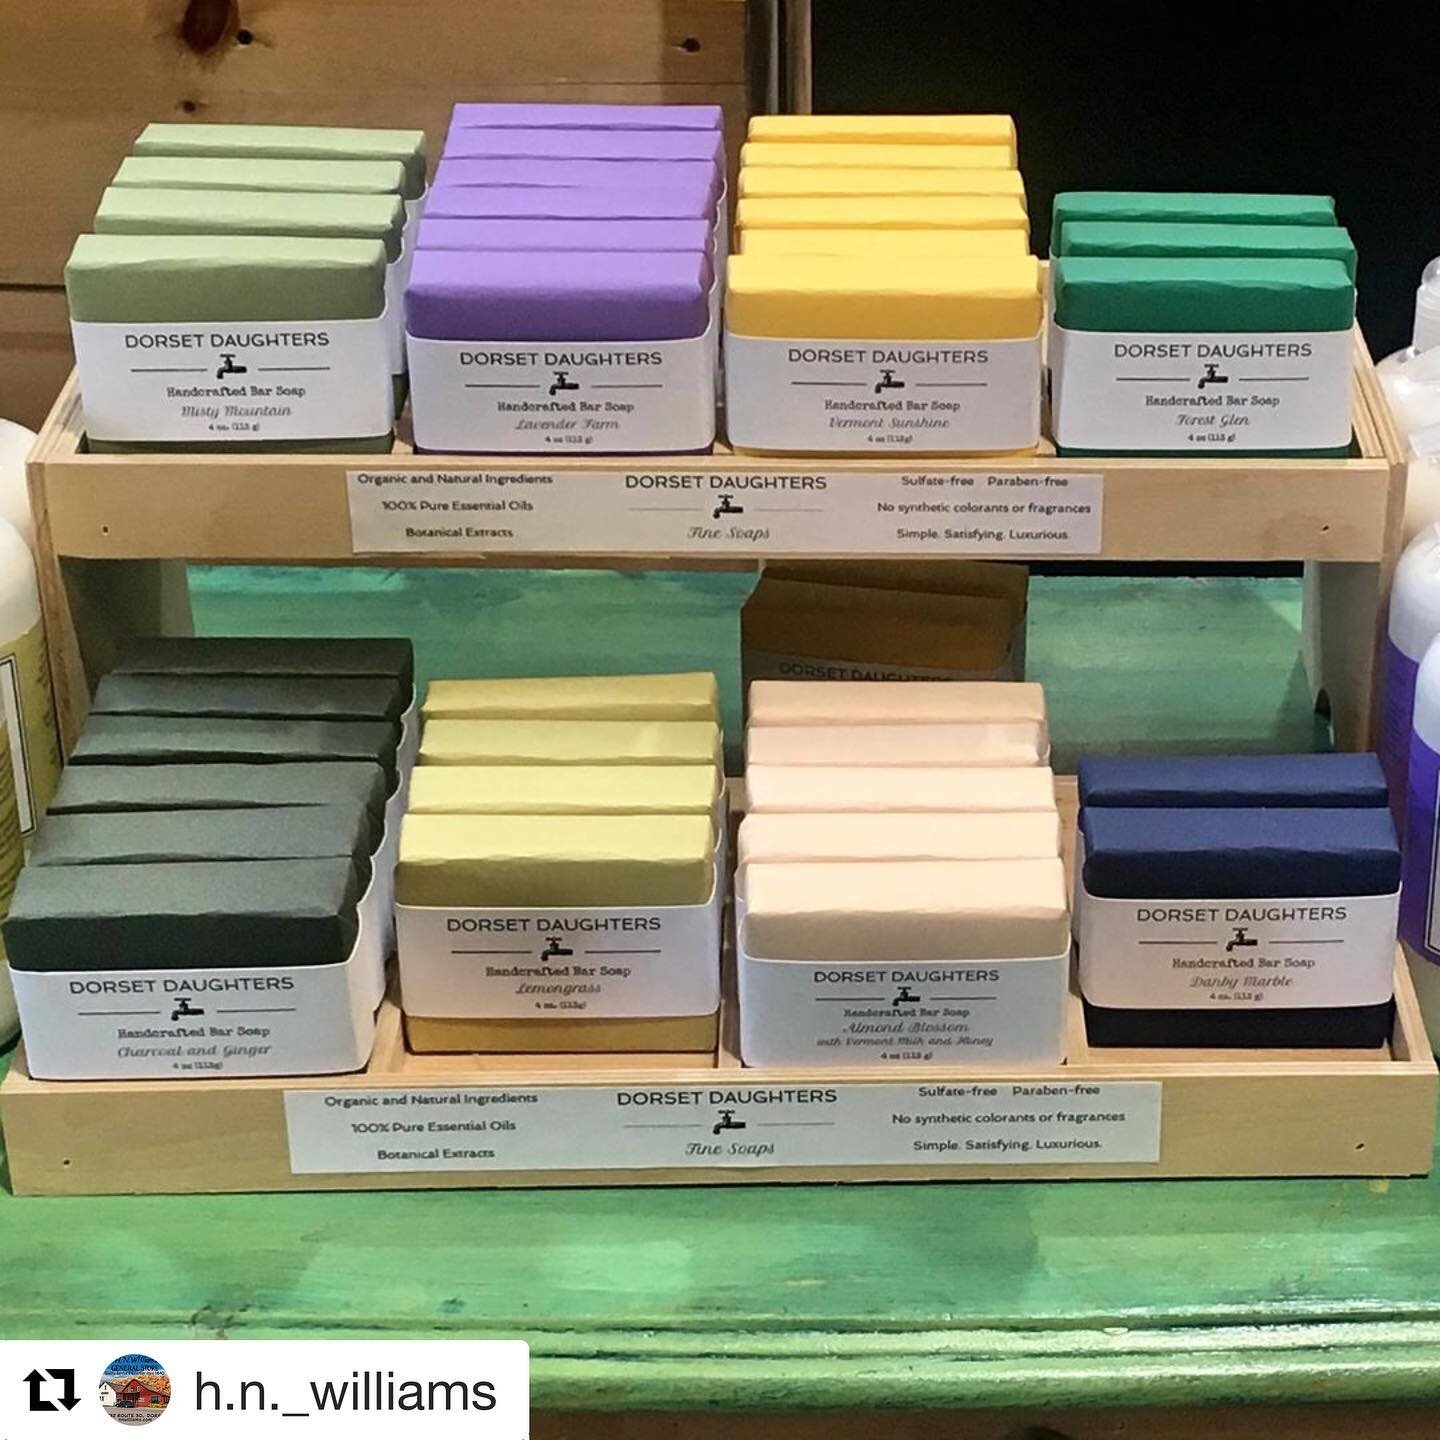 wash wash wash 🧼🧼🧼 #Repost @h.n._williams
・・・
A plug for #dorsetdaughters #soap as we all find ourselves washing our hands more than usual in the days of Covid-19. Organic and natural ingredients. 100% pure essential oils. Made locally here in #do